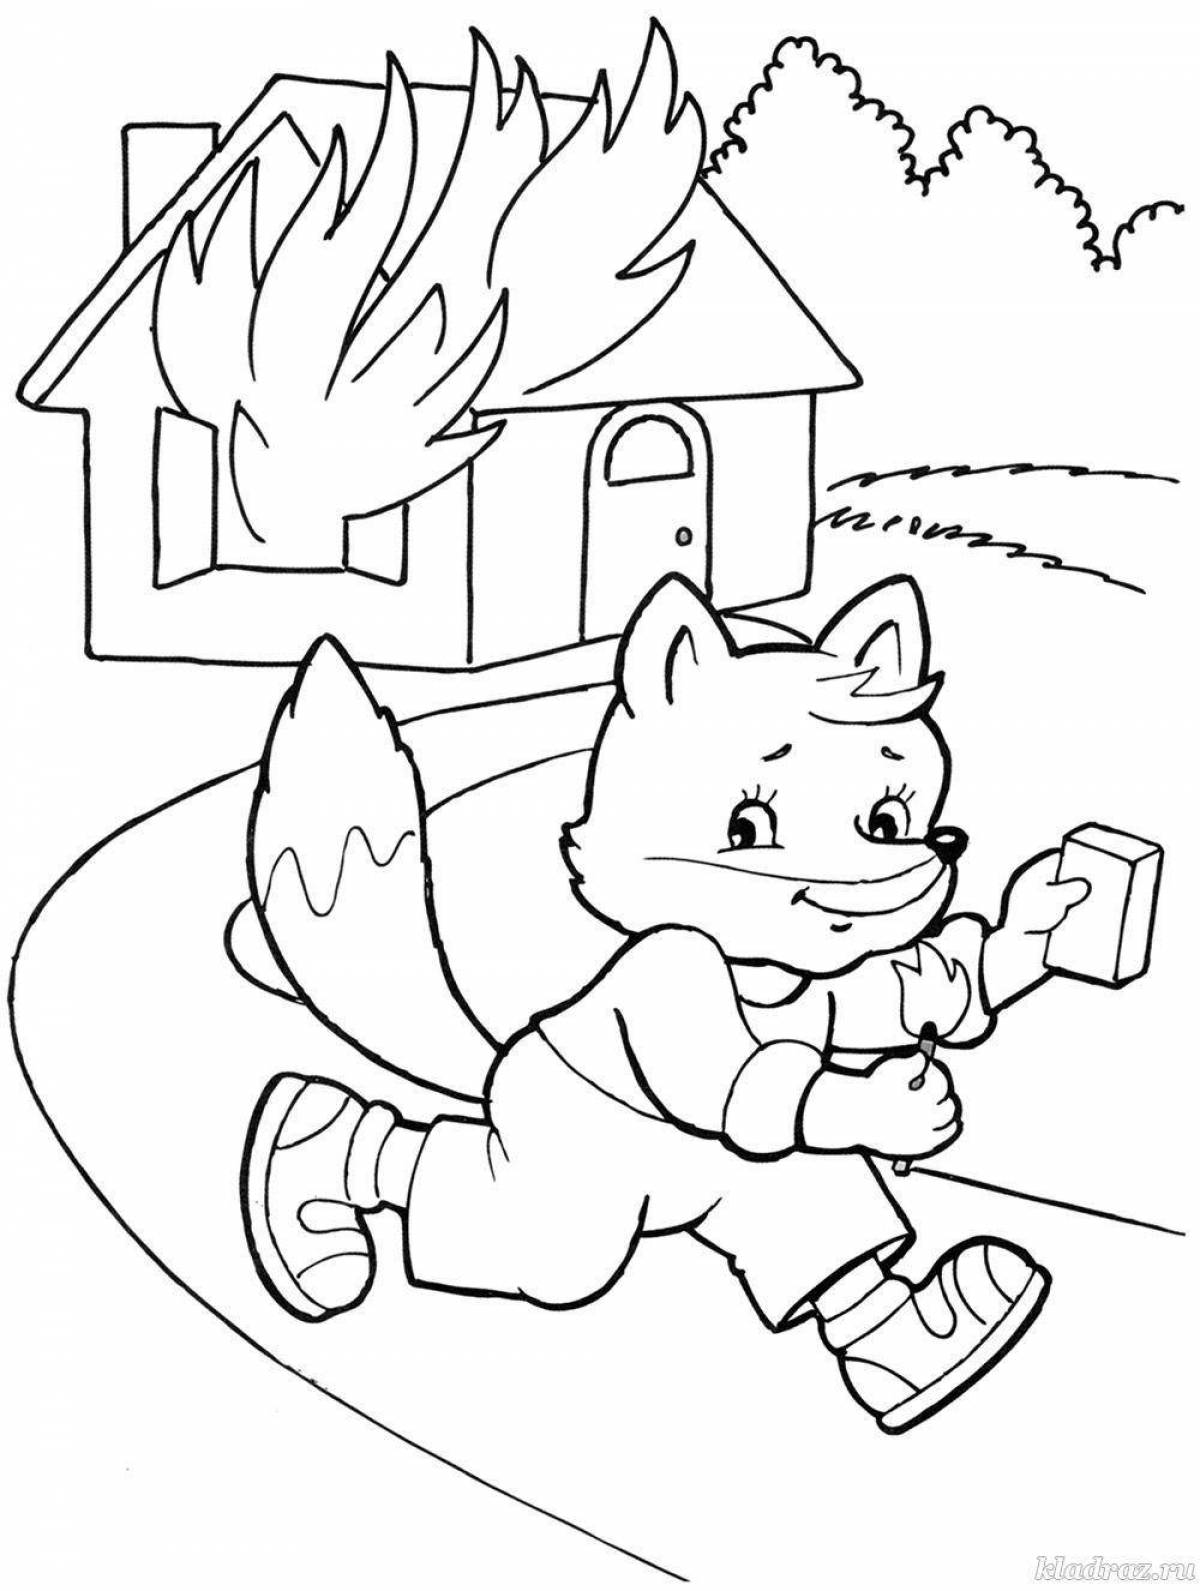 Fire fire coloring book